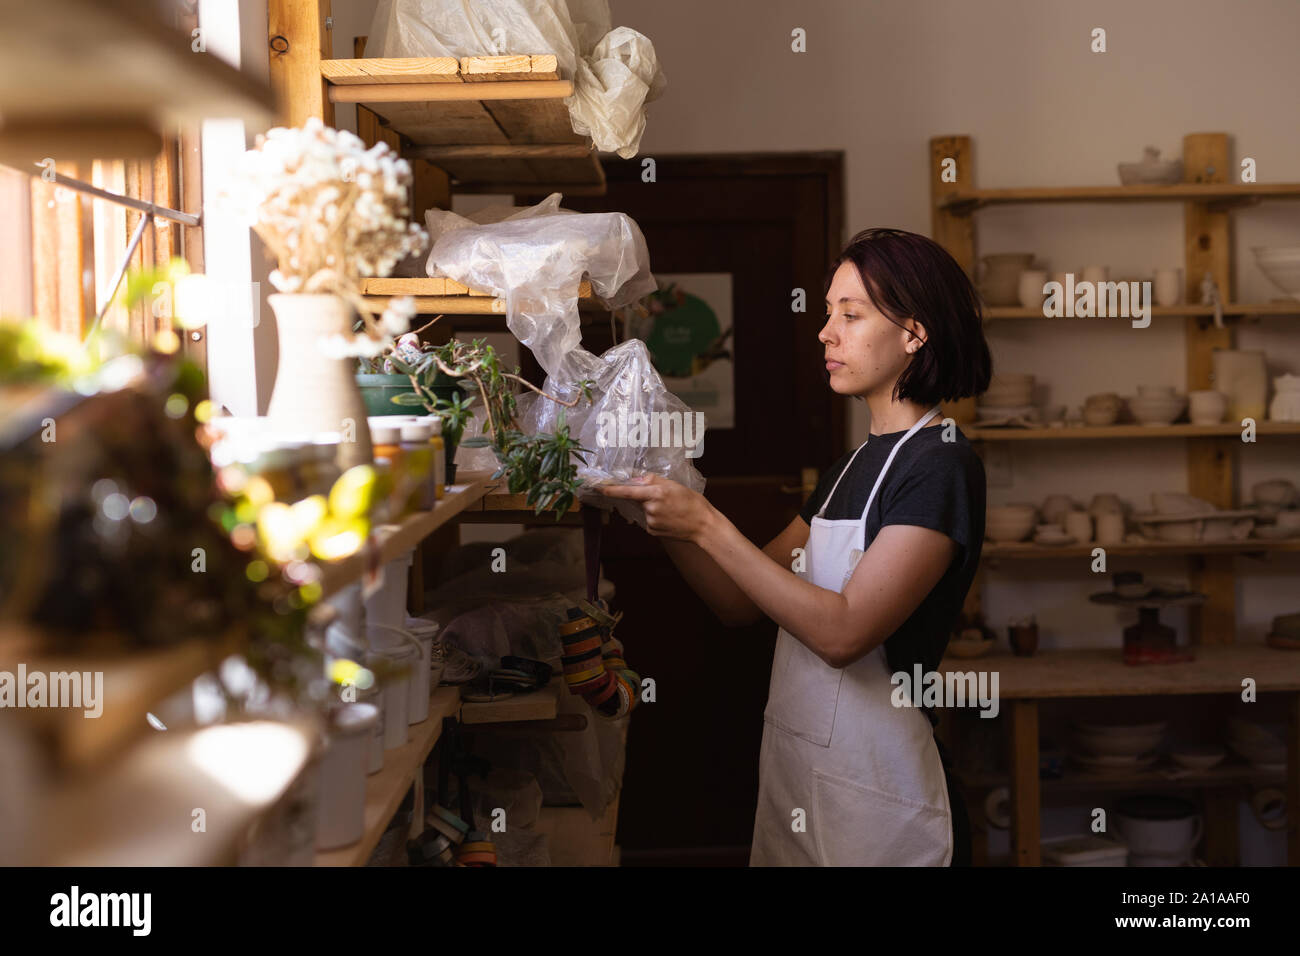 Female potter in a pottery studio taking down a bag of clay from a shelf Stock Photo